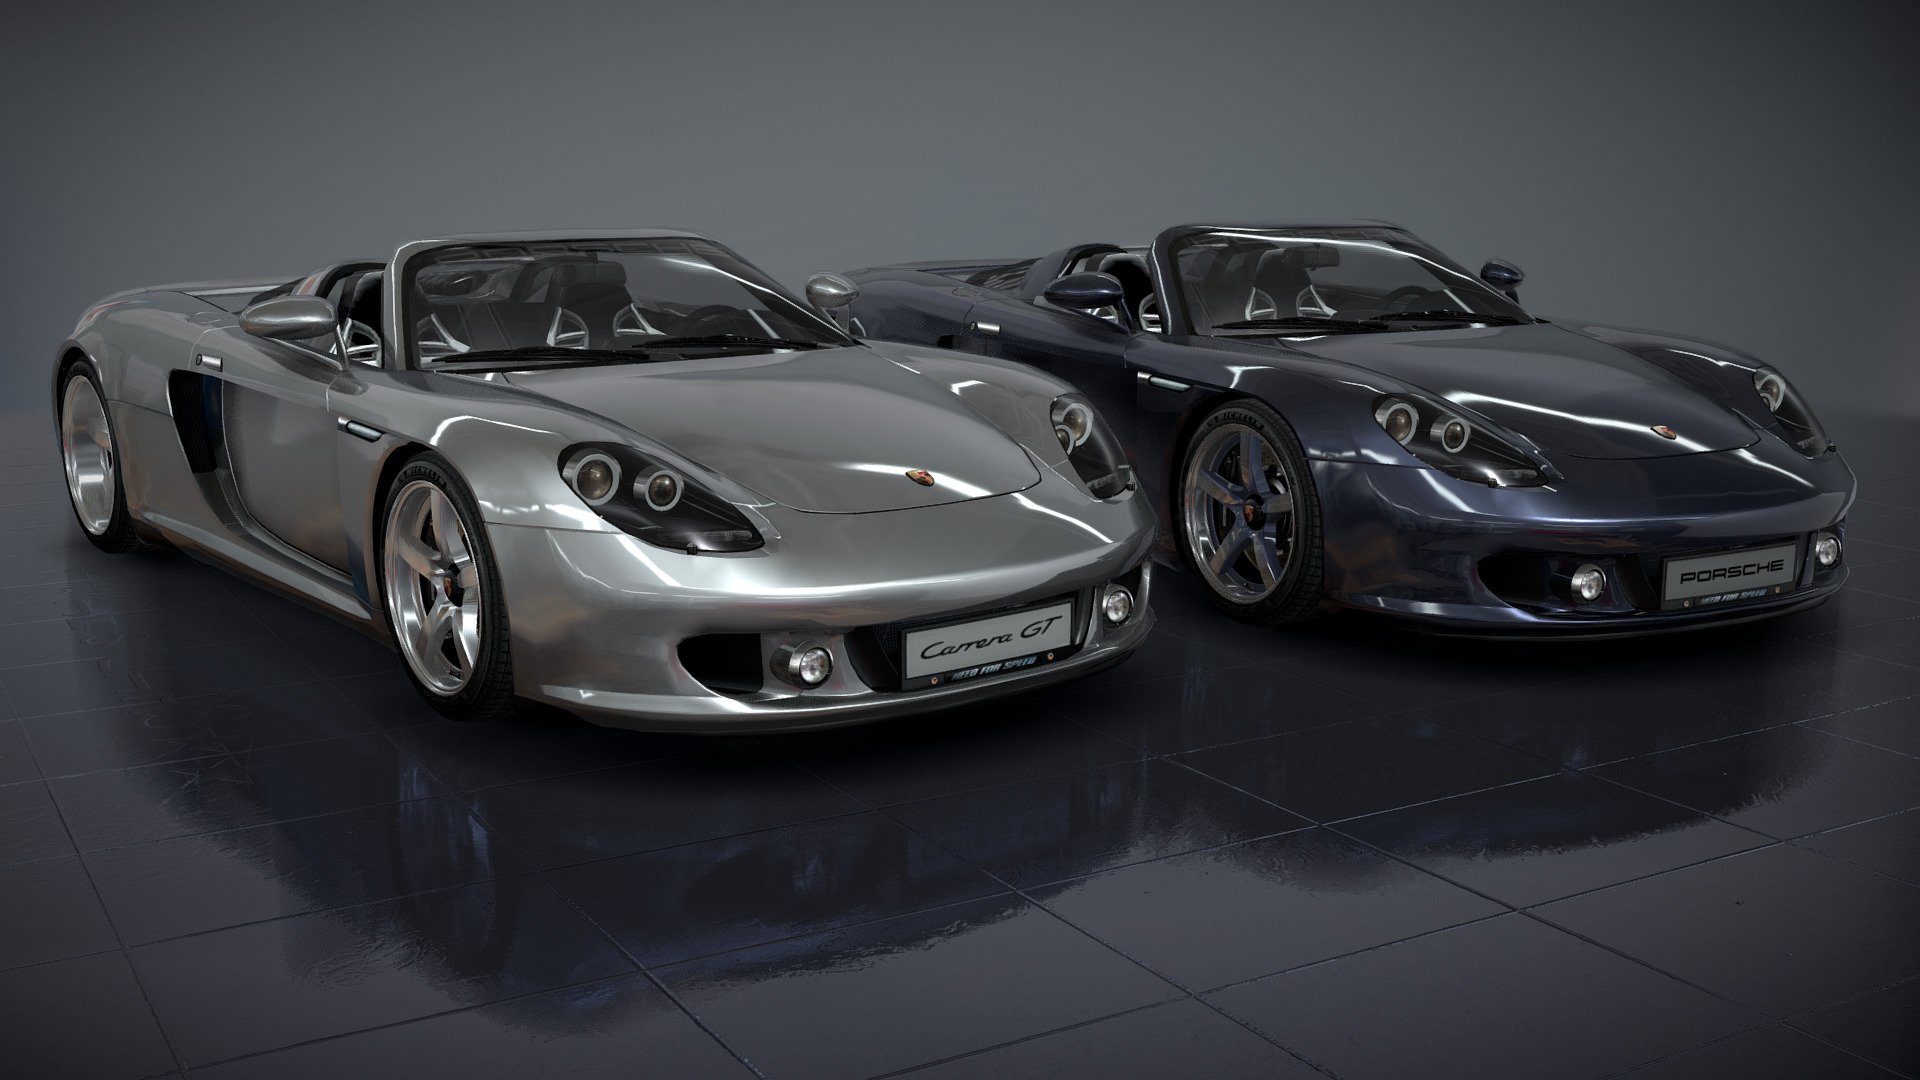 Carrera GT Concept has some details that look more interesting than in the Carrera GT version.

Therefore, in this work, i combined the looks of GT and GT Concept



ALLOWED use this model -
for games.
visual and art projects.
presentations.
(with showing credits)

FORBIDDEN -
sell.
make a profit with it.
assign their authorship.
upload on other sites.
reupload on Sketchfab.



Based on the model from - Forza Motorsport 3

Parts from - Forza Motorsport 4, Project CARS

Polycount - midpoly with some HD details

Geometry edited and modified - Alex.Ka.

Textures: Forza Motorsport 3, NFS: Most Wanted, Alex.Ka.

Qquality and realistic texture work By Alex.Ka.

Special &ldquo;MICHELIN Pilot Sport 4S